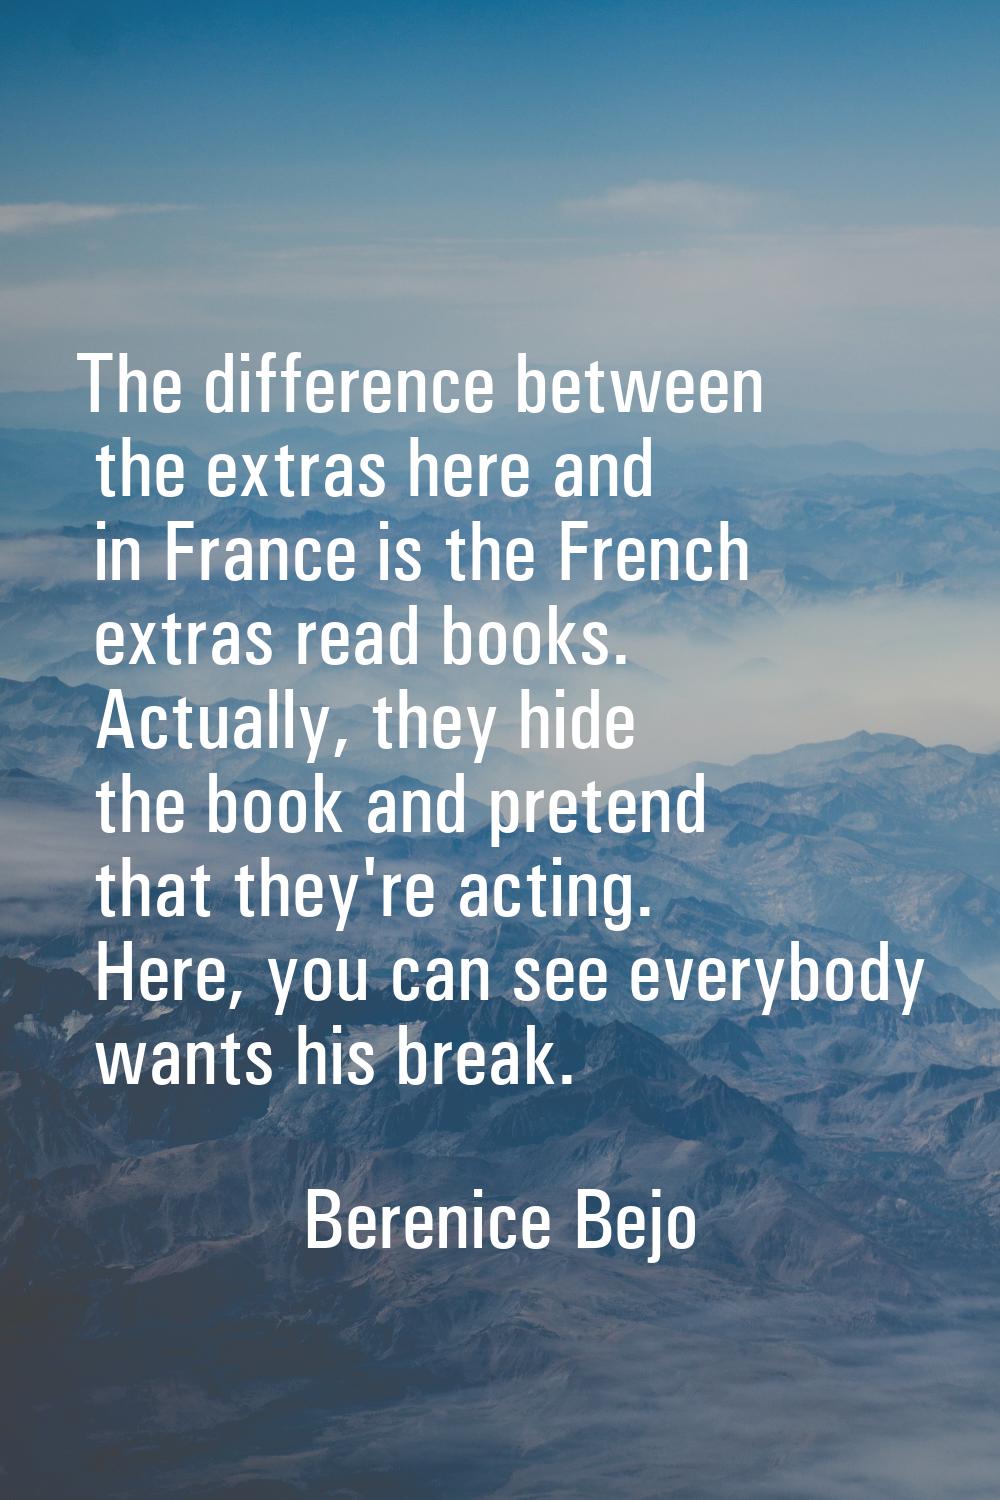 The difference between the extras here and in France is the French extras read books. Actually, the